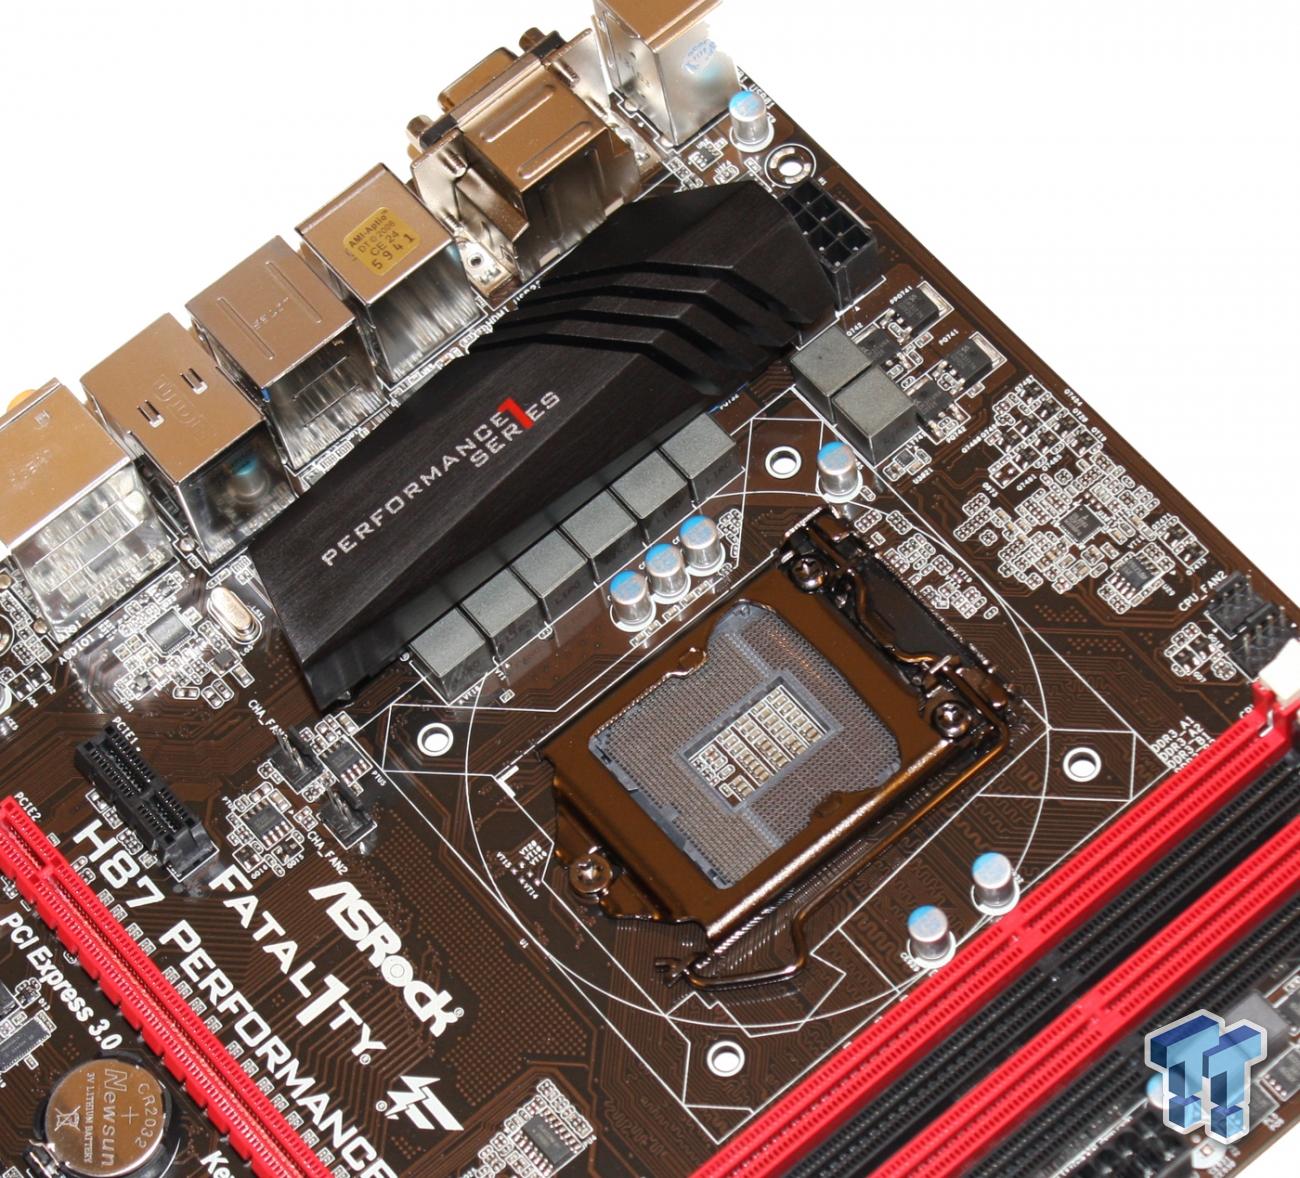 ASRock Fatal1ty H87 Performance (Intel H87) Motherboard Review